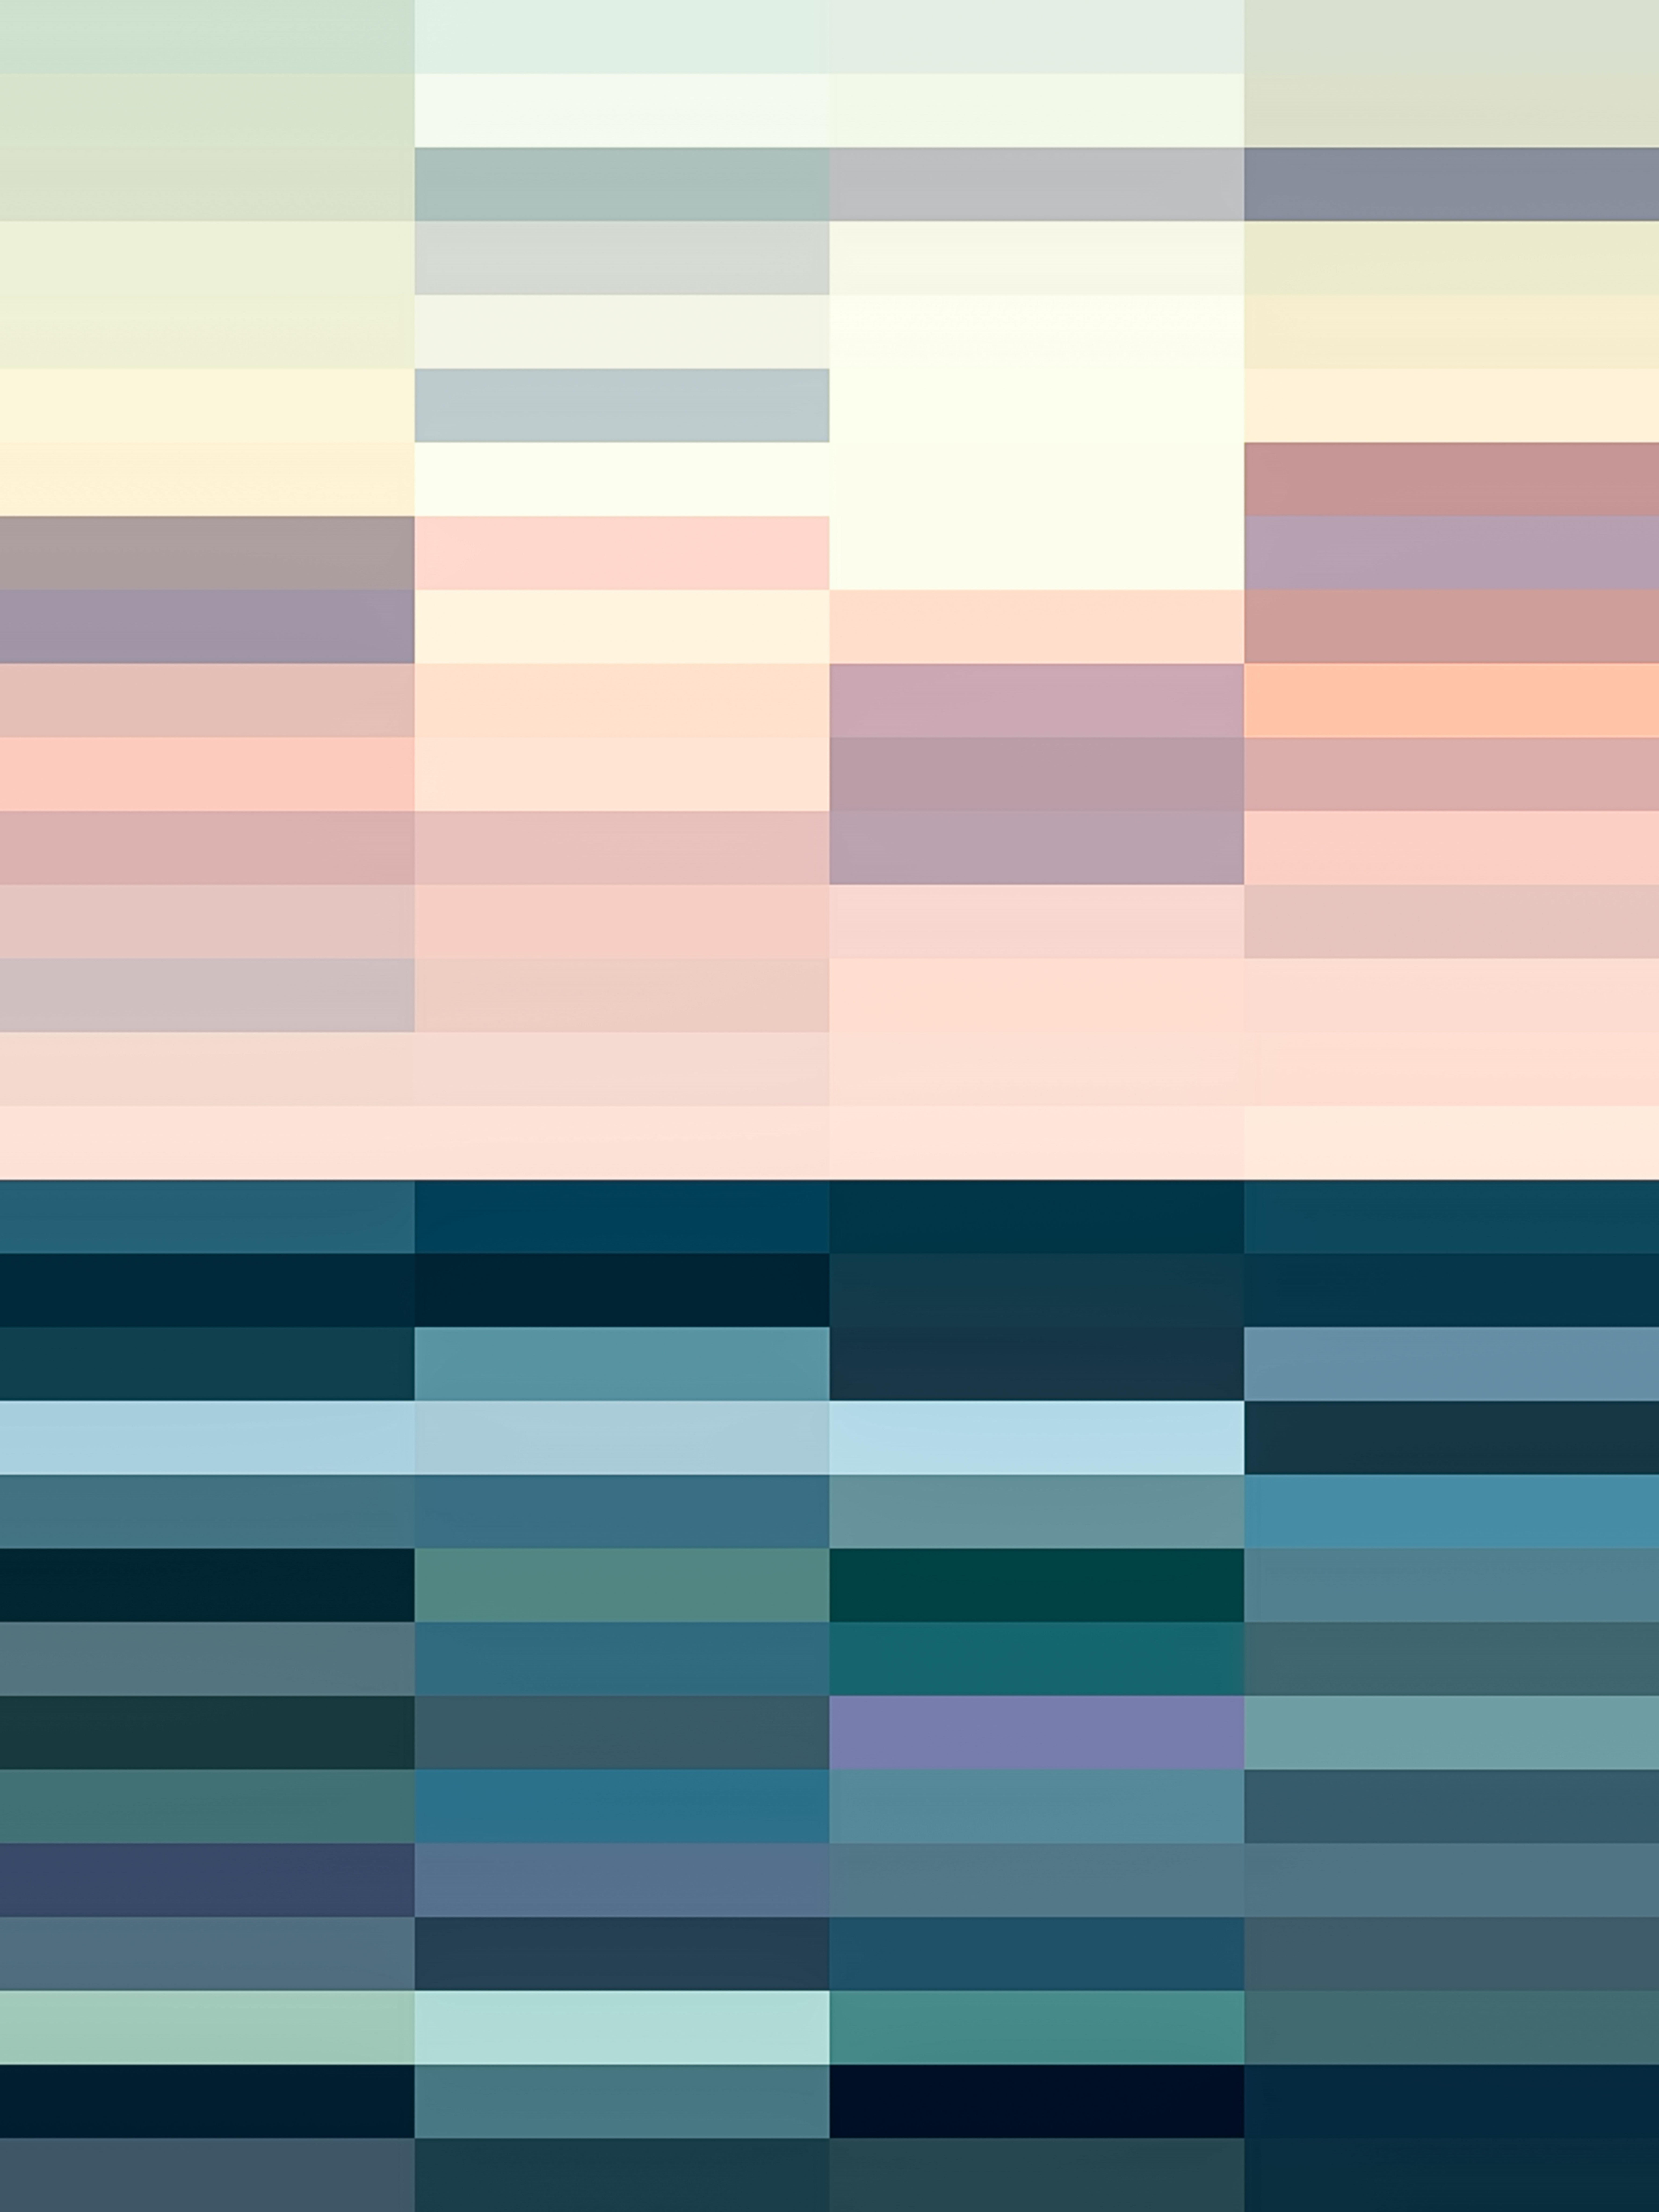 Southern Sea 1, Digitally Abstracted Seascape Printed on Metal, 2021